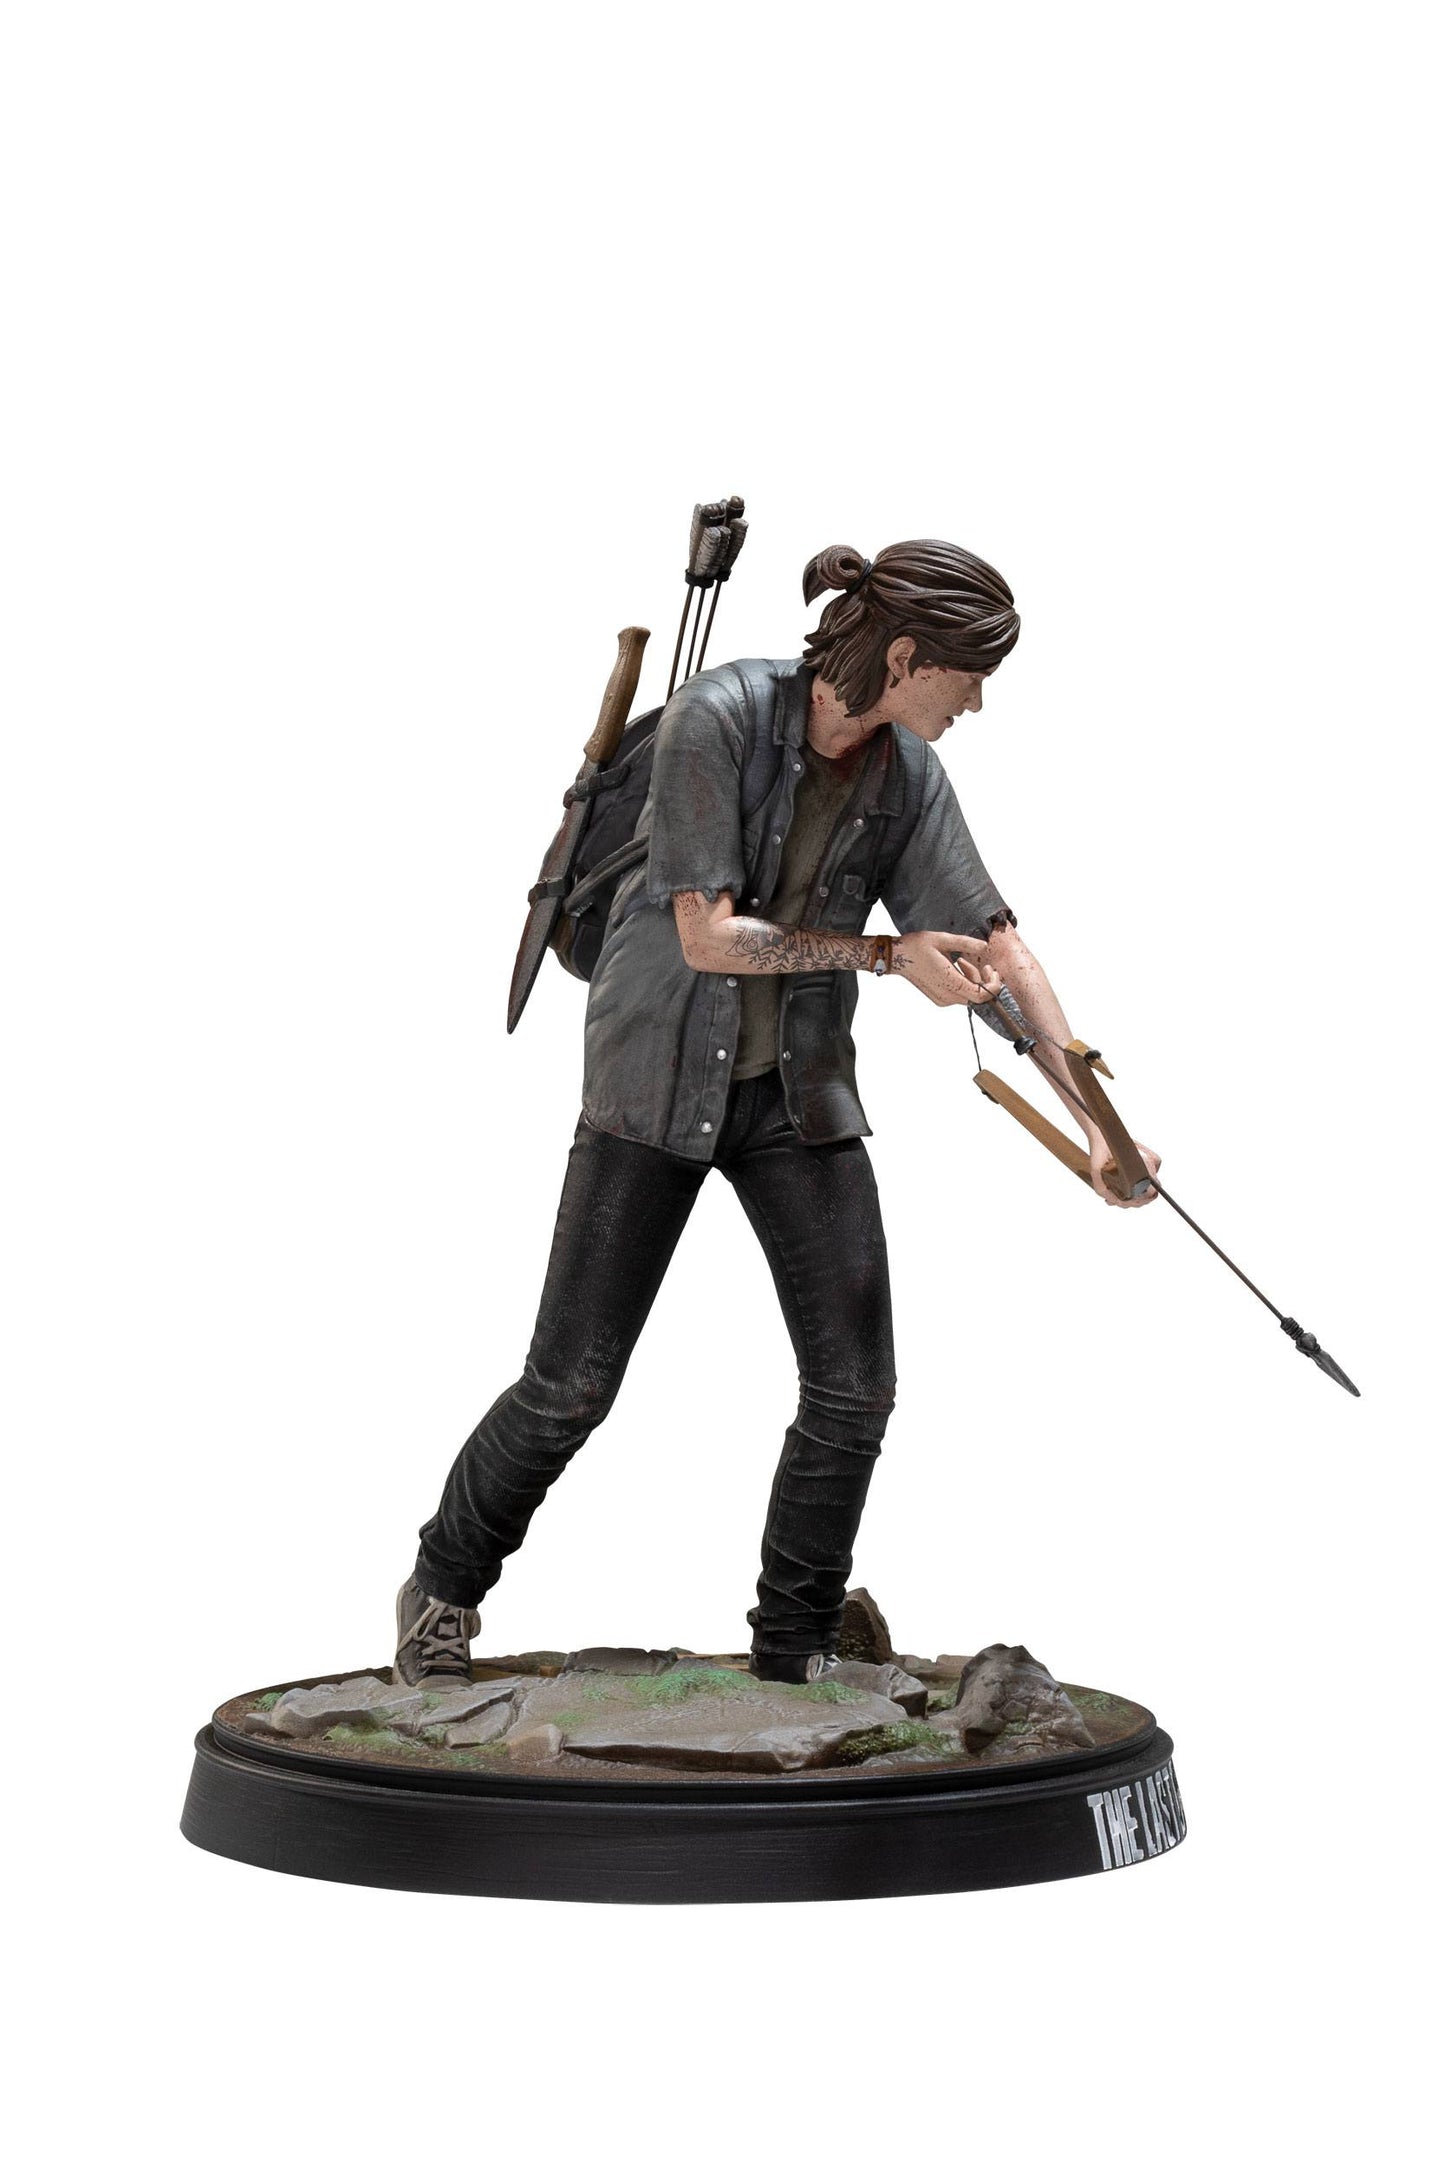 THE LAST OF US - Ellie with Bow 20cm